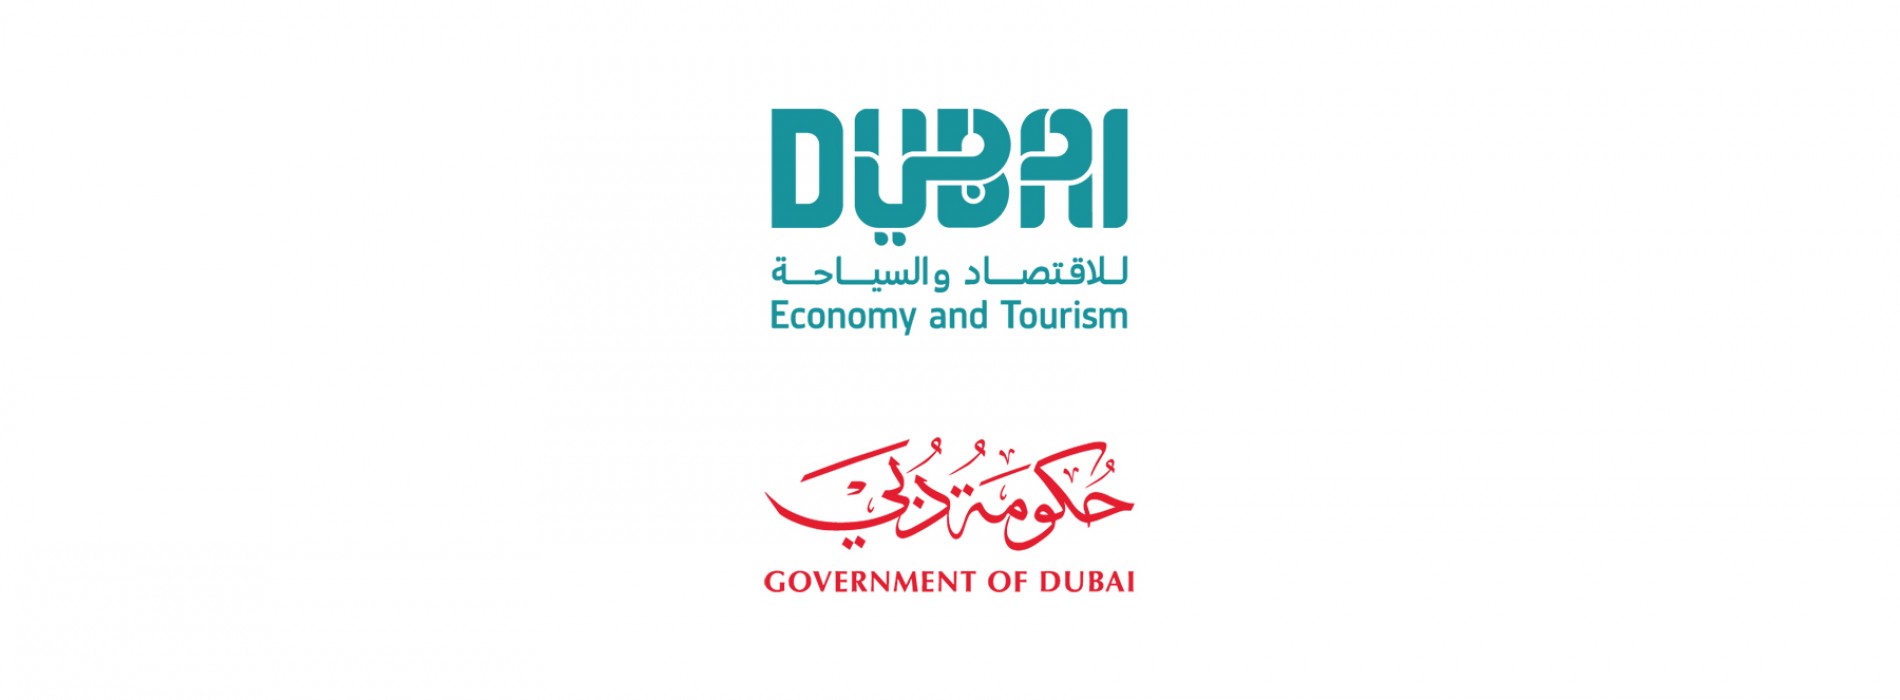 DUBAI ANNOUNCES FIVE-YEAR MULTIPLE-ENTRY VISA FOR TOURISTS FROM TOP SOURCE MARKET INDIA AMID RECORD VISITOR NUMBERS